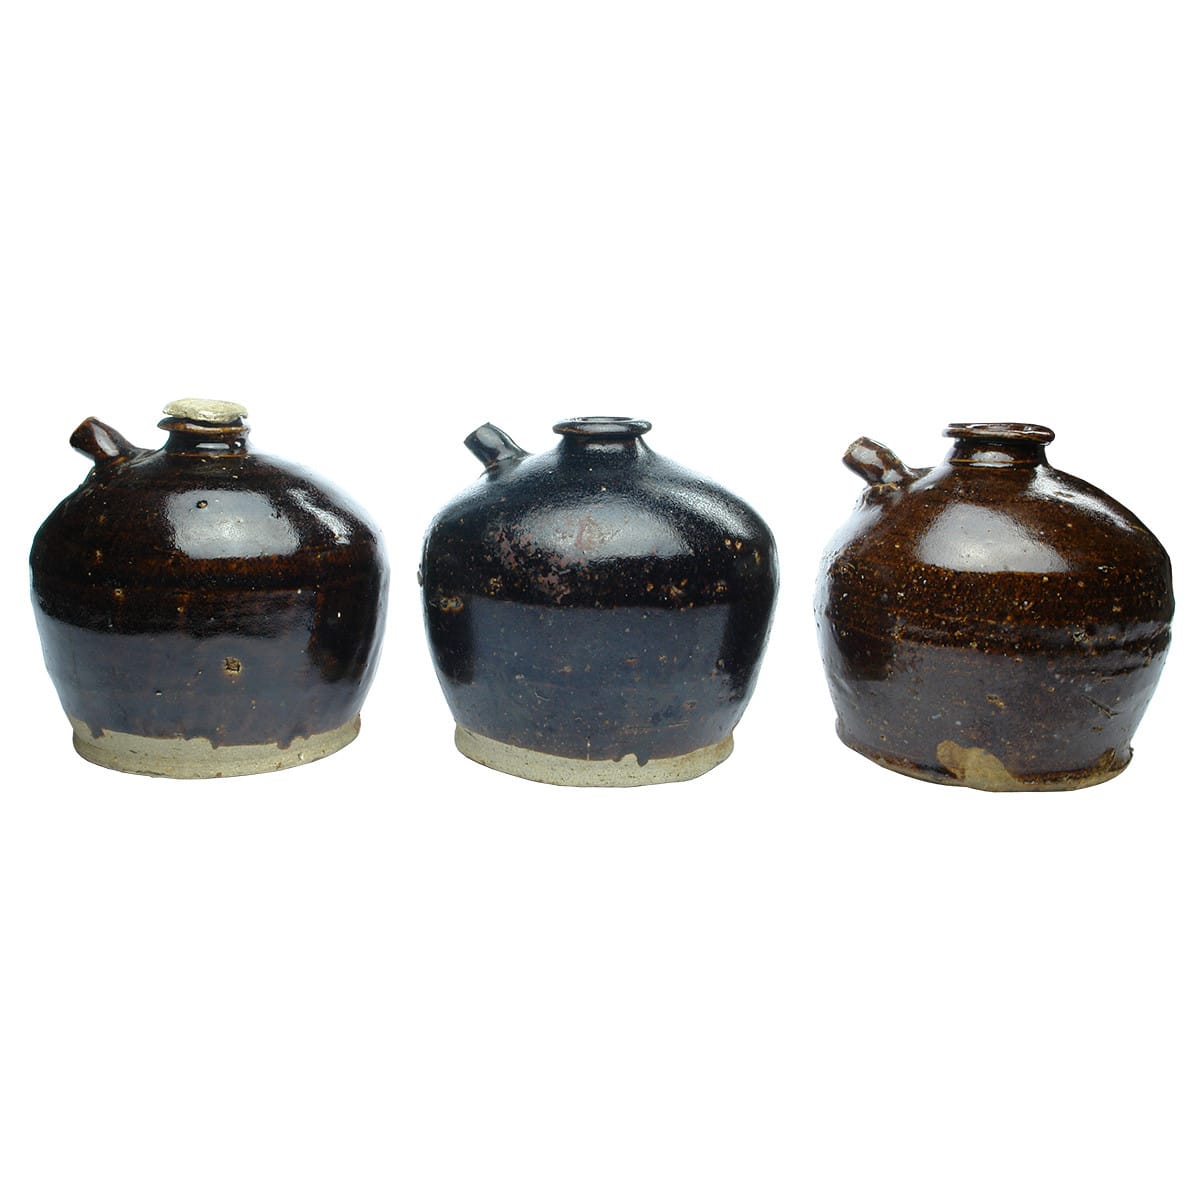 3 Chinese Soy Sauce Jars. One with what I assume is its original little cement type stopper. Differing Brown Glazes.